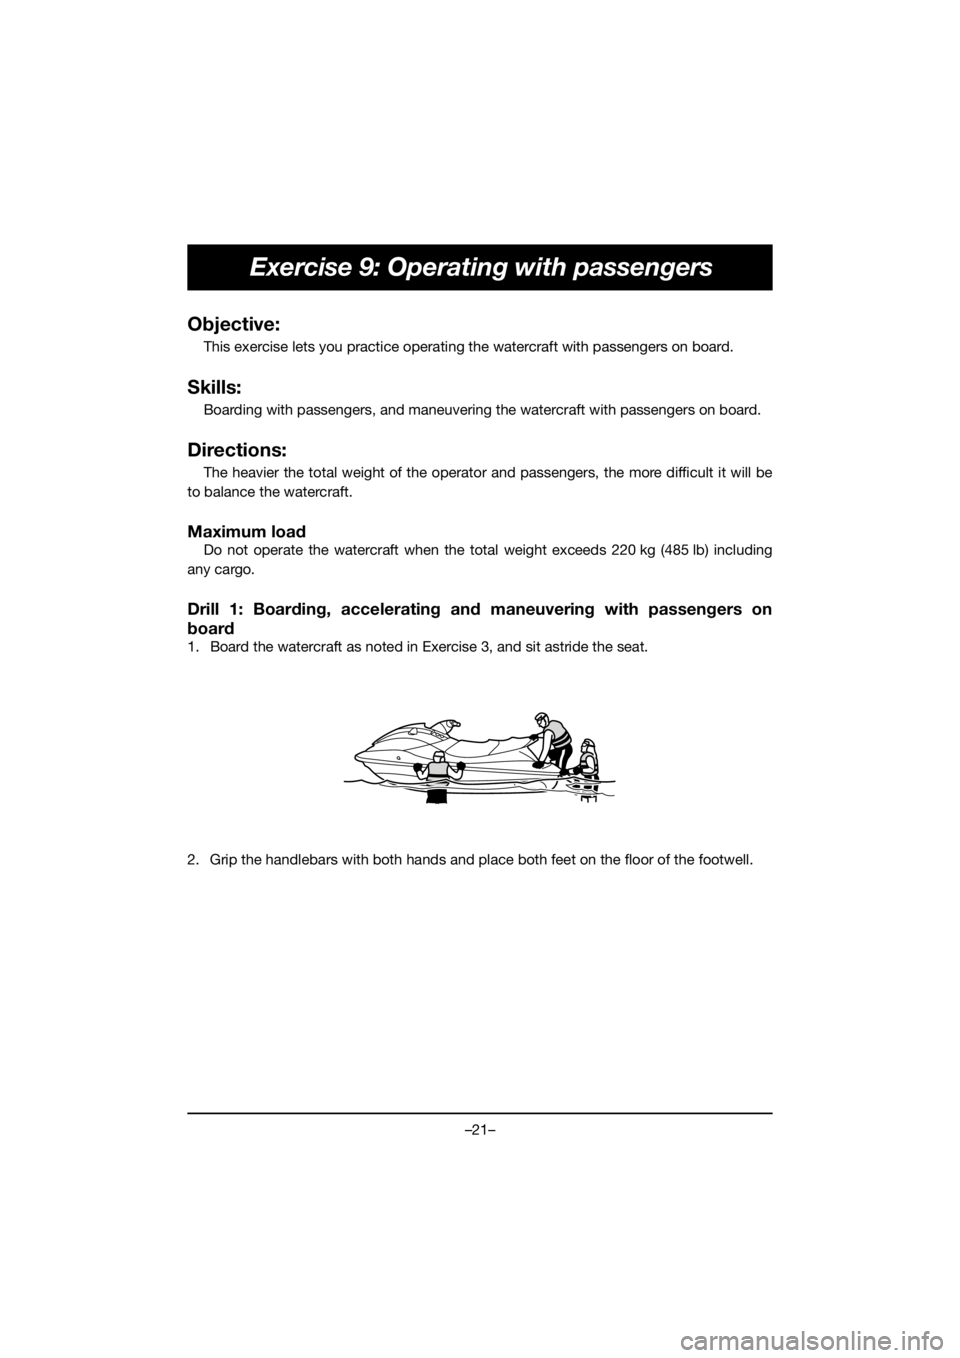 YAMAHA FJR1300 2020  Manuale duso (in Italian) –21–
Exercise 9: Operating with passengers
Objective:
This exercise lets you practice operating the watercraft with passengers on board.
Skills:
Boarding with passengers, and maneuvering the water